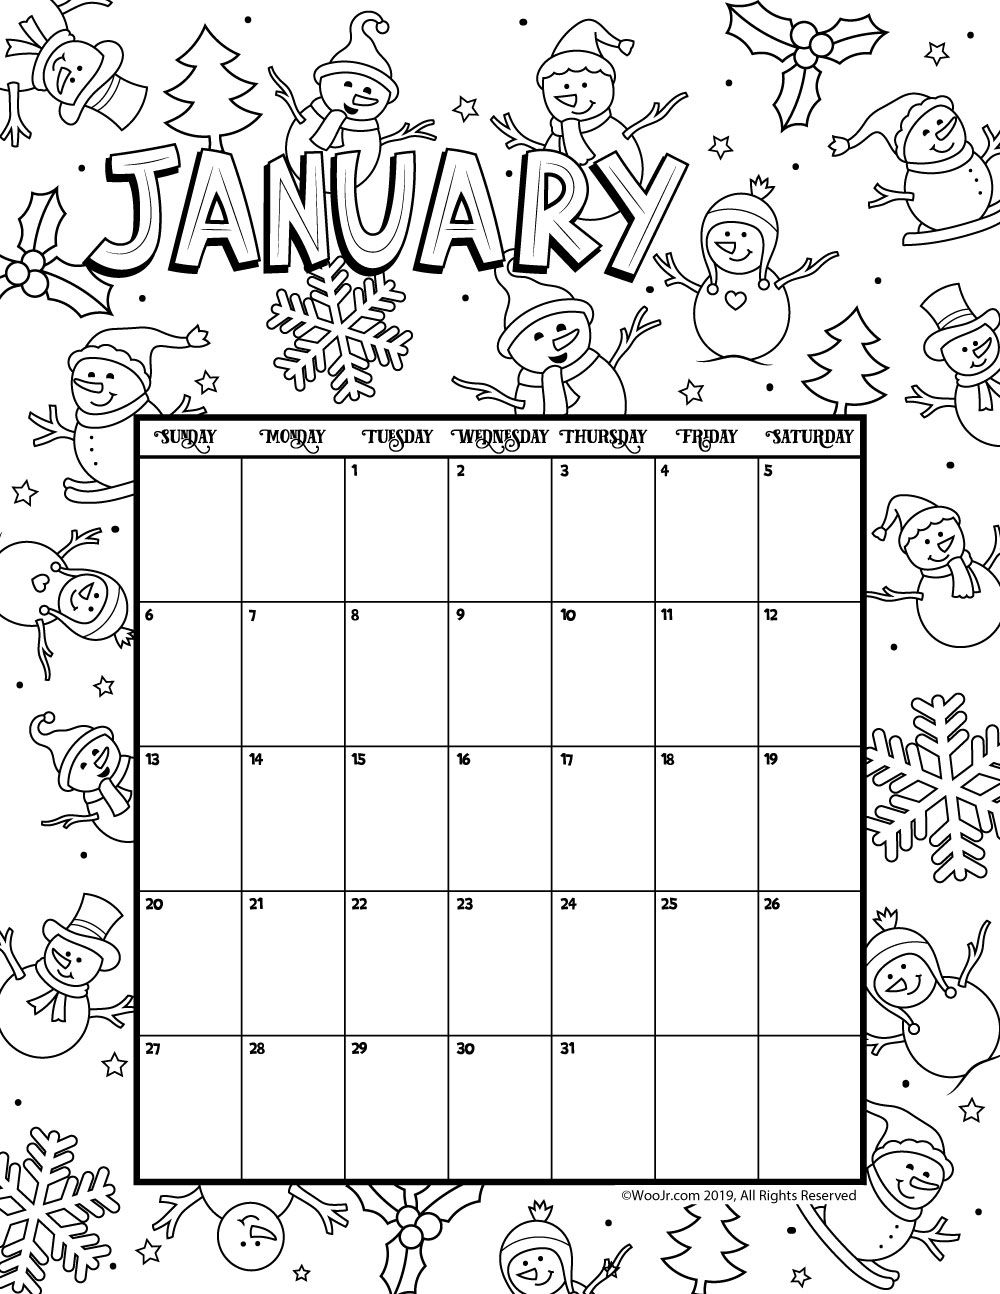 January 2019 Coloring Calendar | Printable Coloring Pages